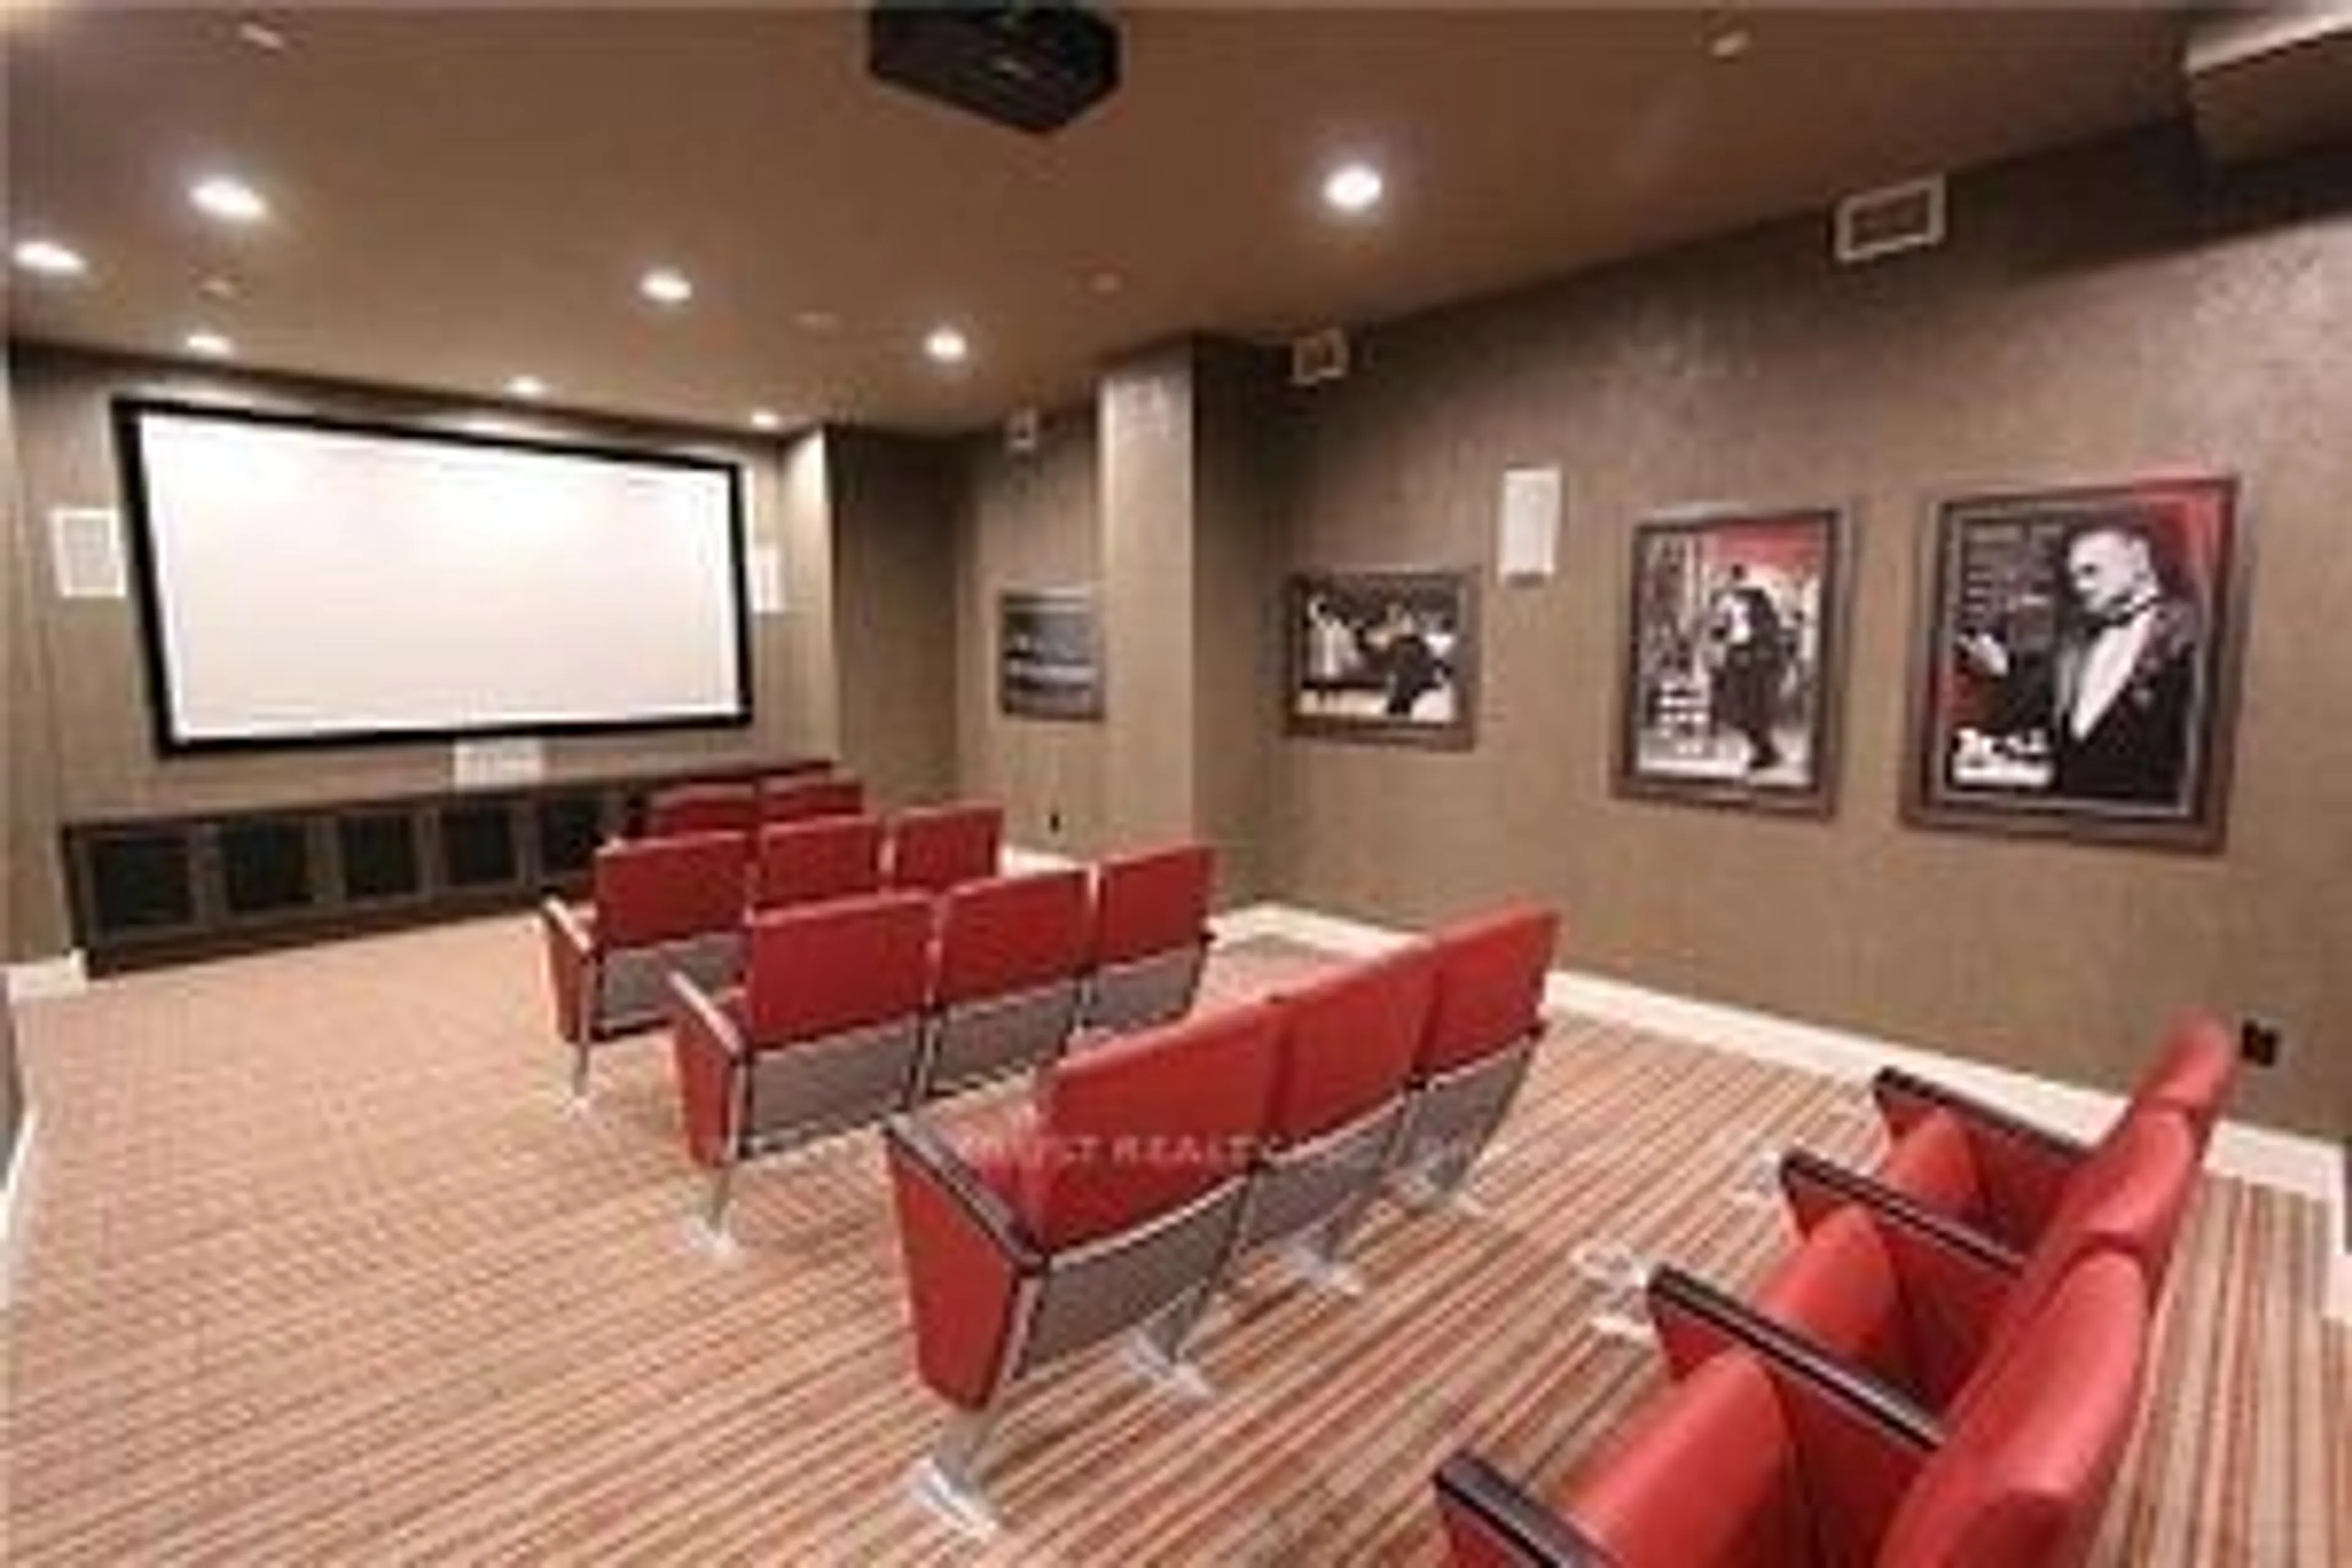 Media room for 23 Sheppard Ave #2404, Toronto Ontario M2N 0C8